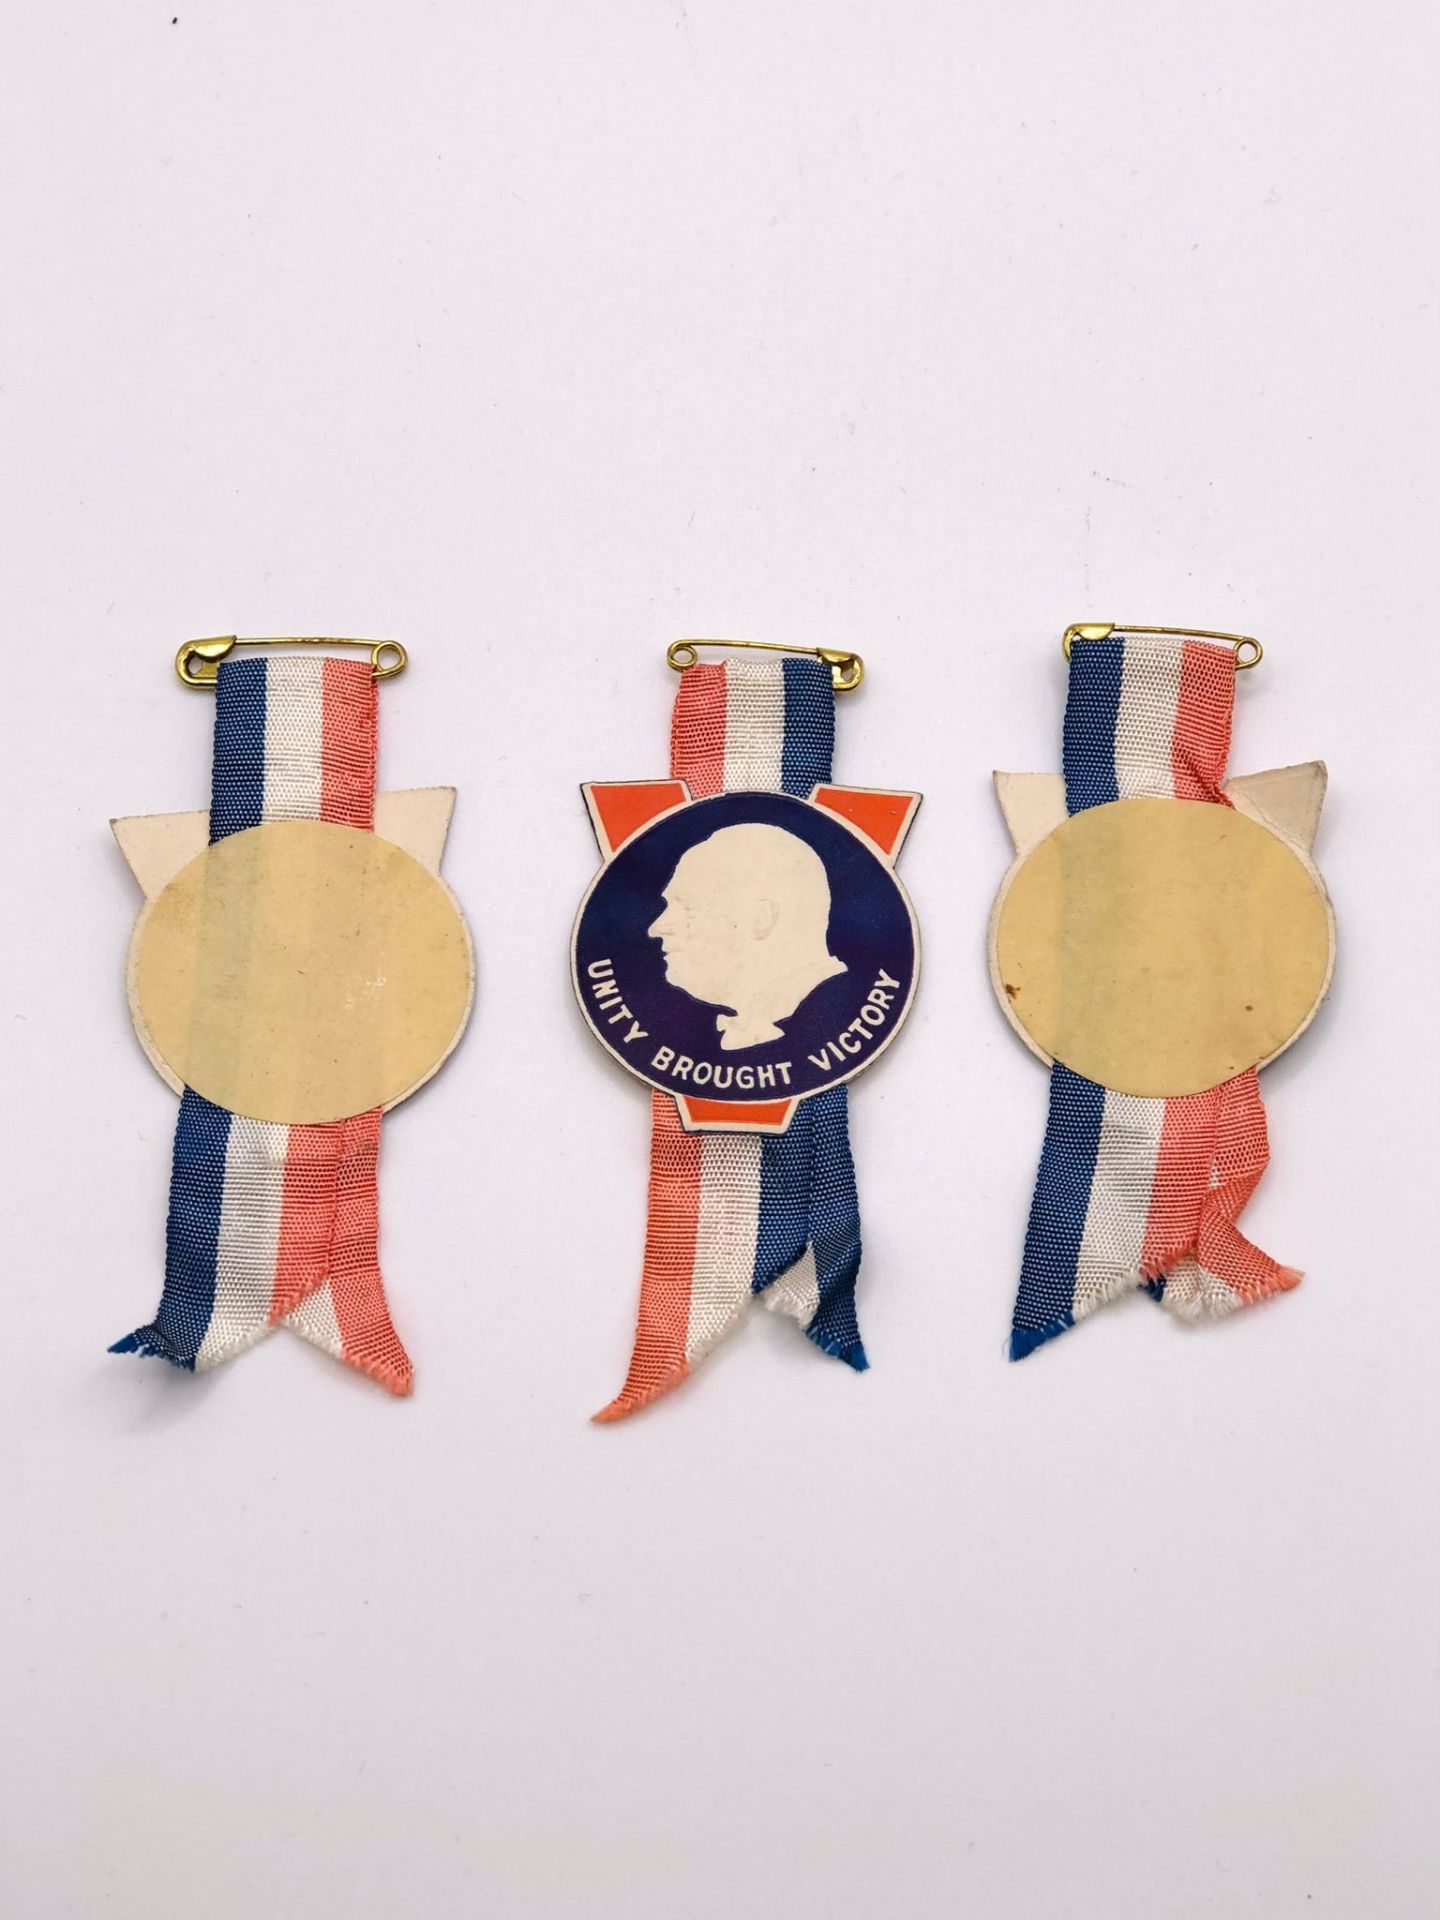 Set of 3 Very Rare Badges Churchill Unity Brought Victory 1945 WW2 Collectors - Image 2 of 2